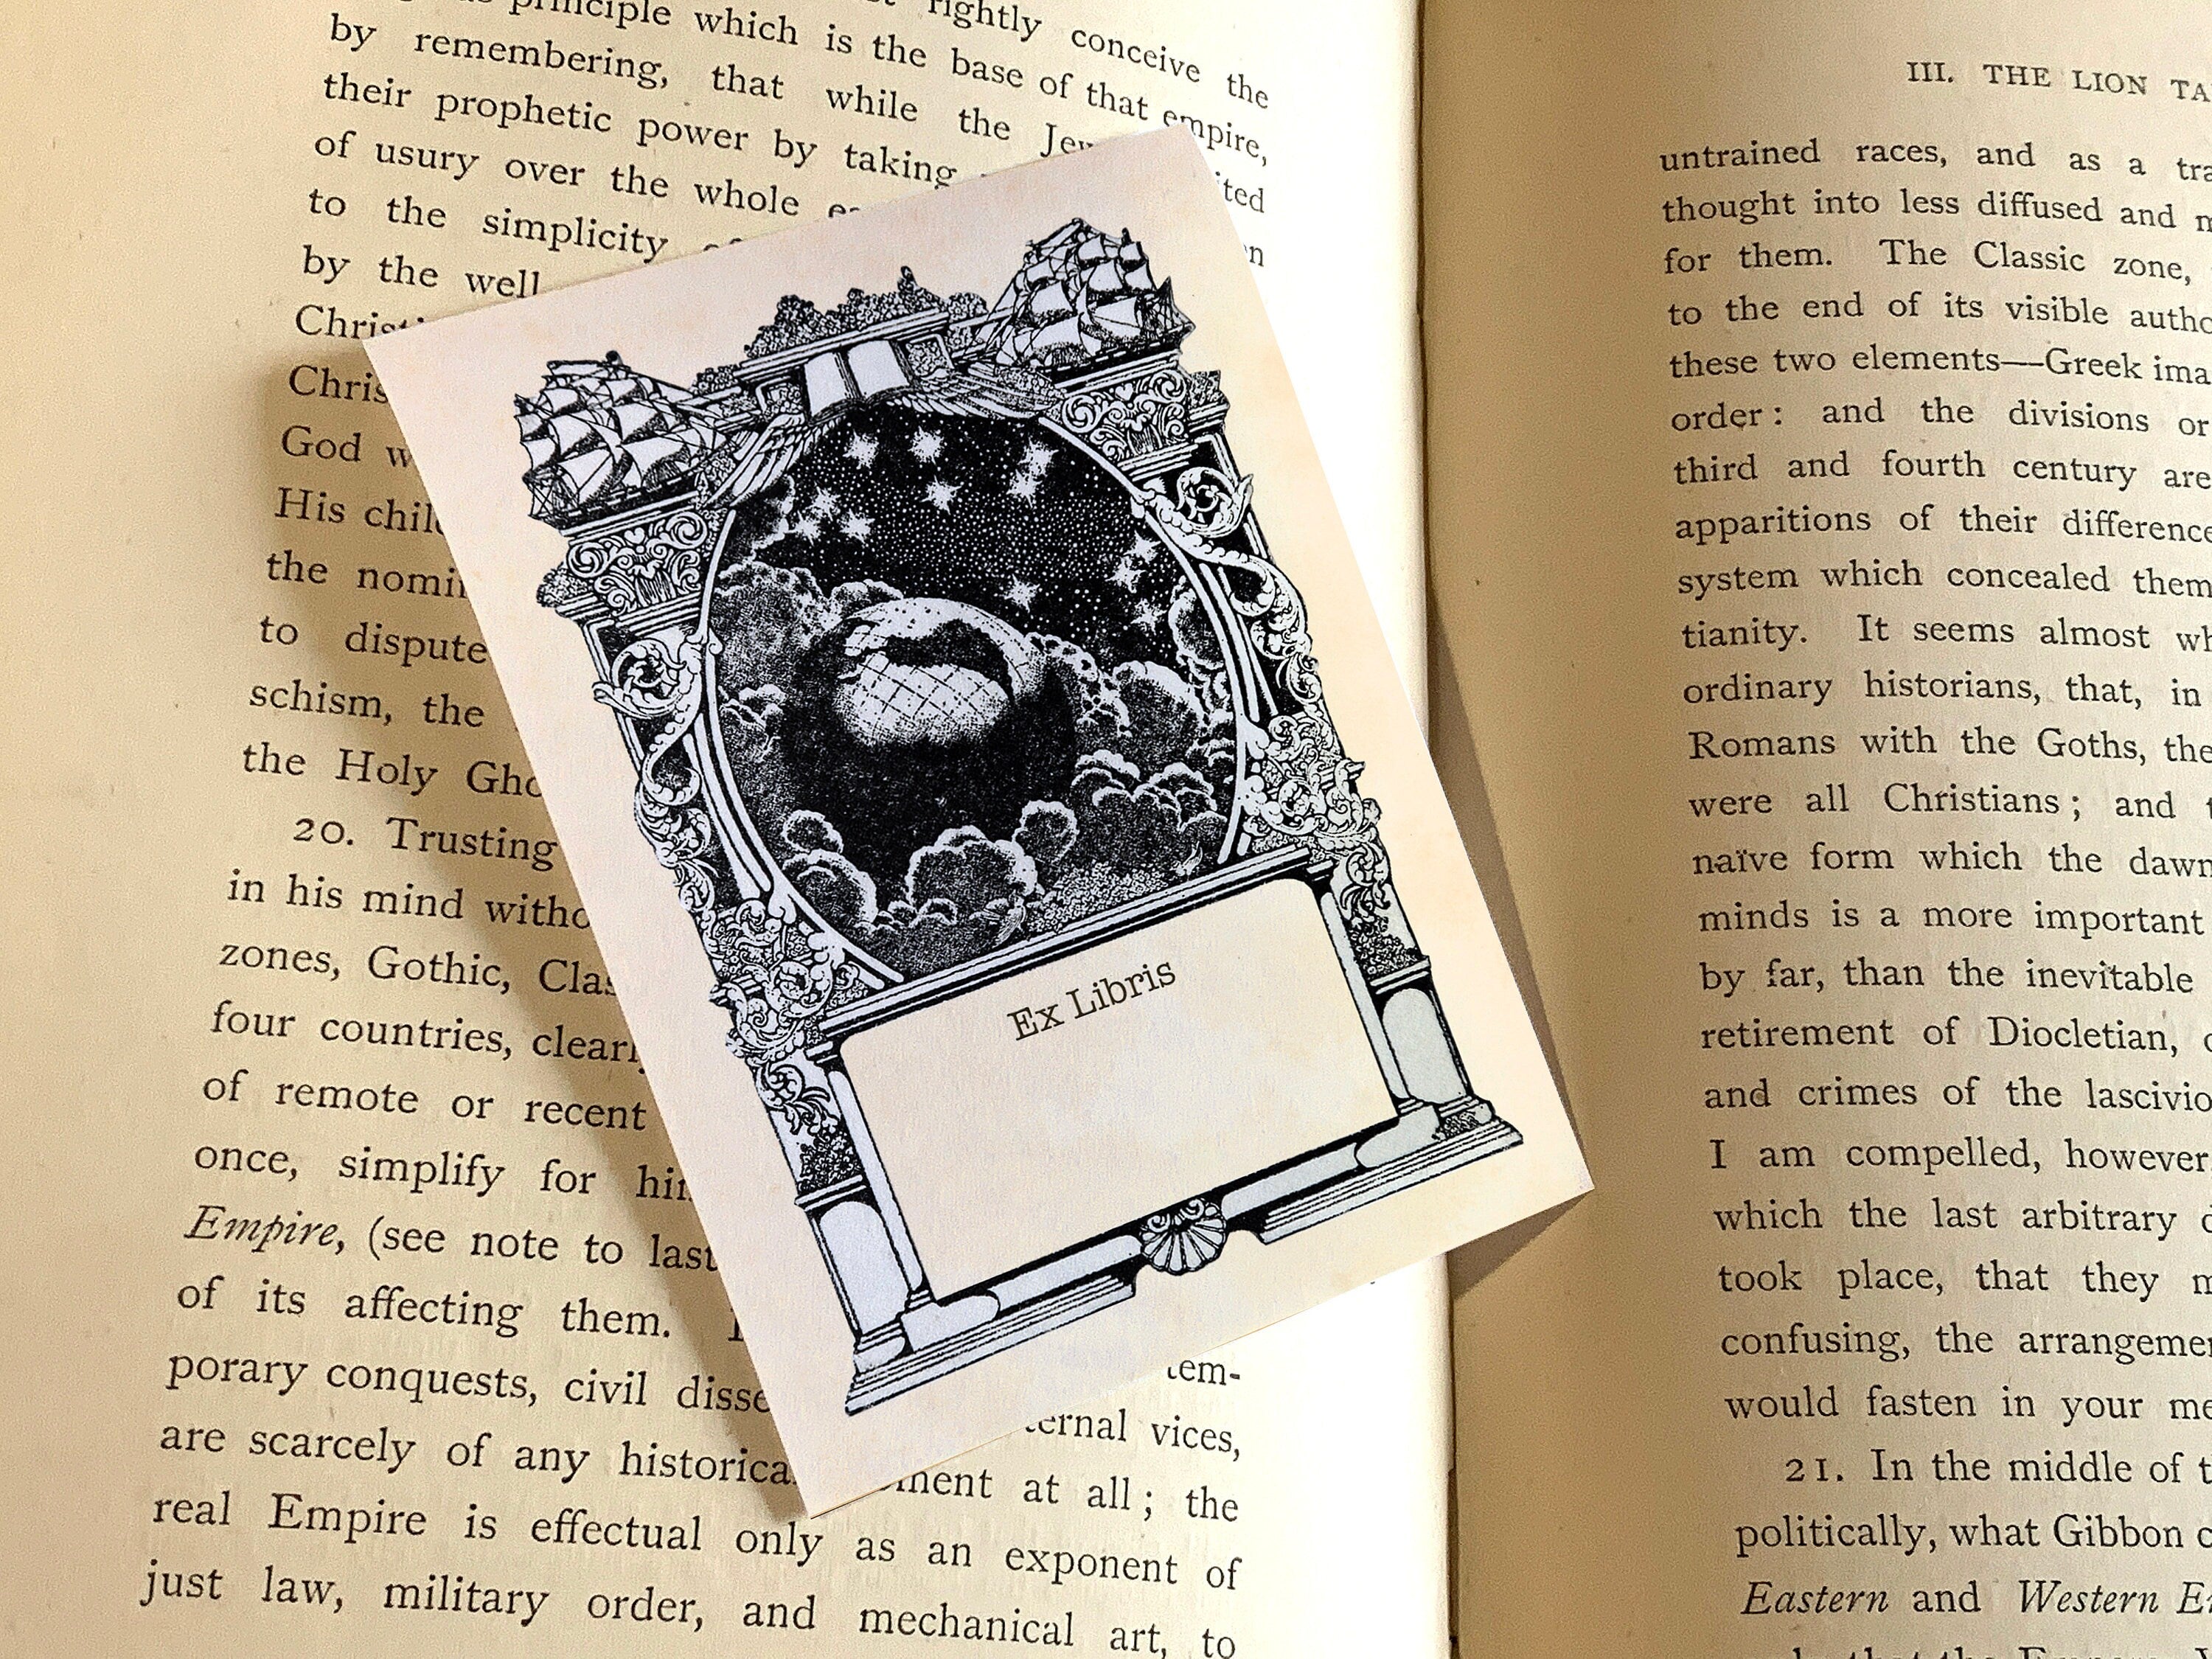 Celestial Journey, Personalized Ex-Libris Bookplates, Crafted on Traditional Gummed Paper, 3in x 4in, Set of 30